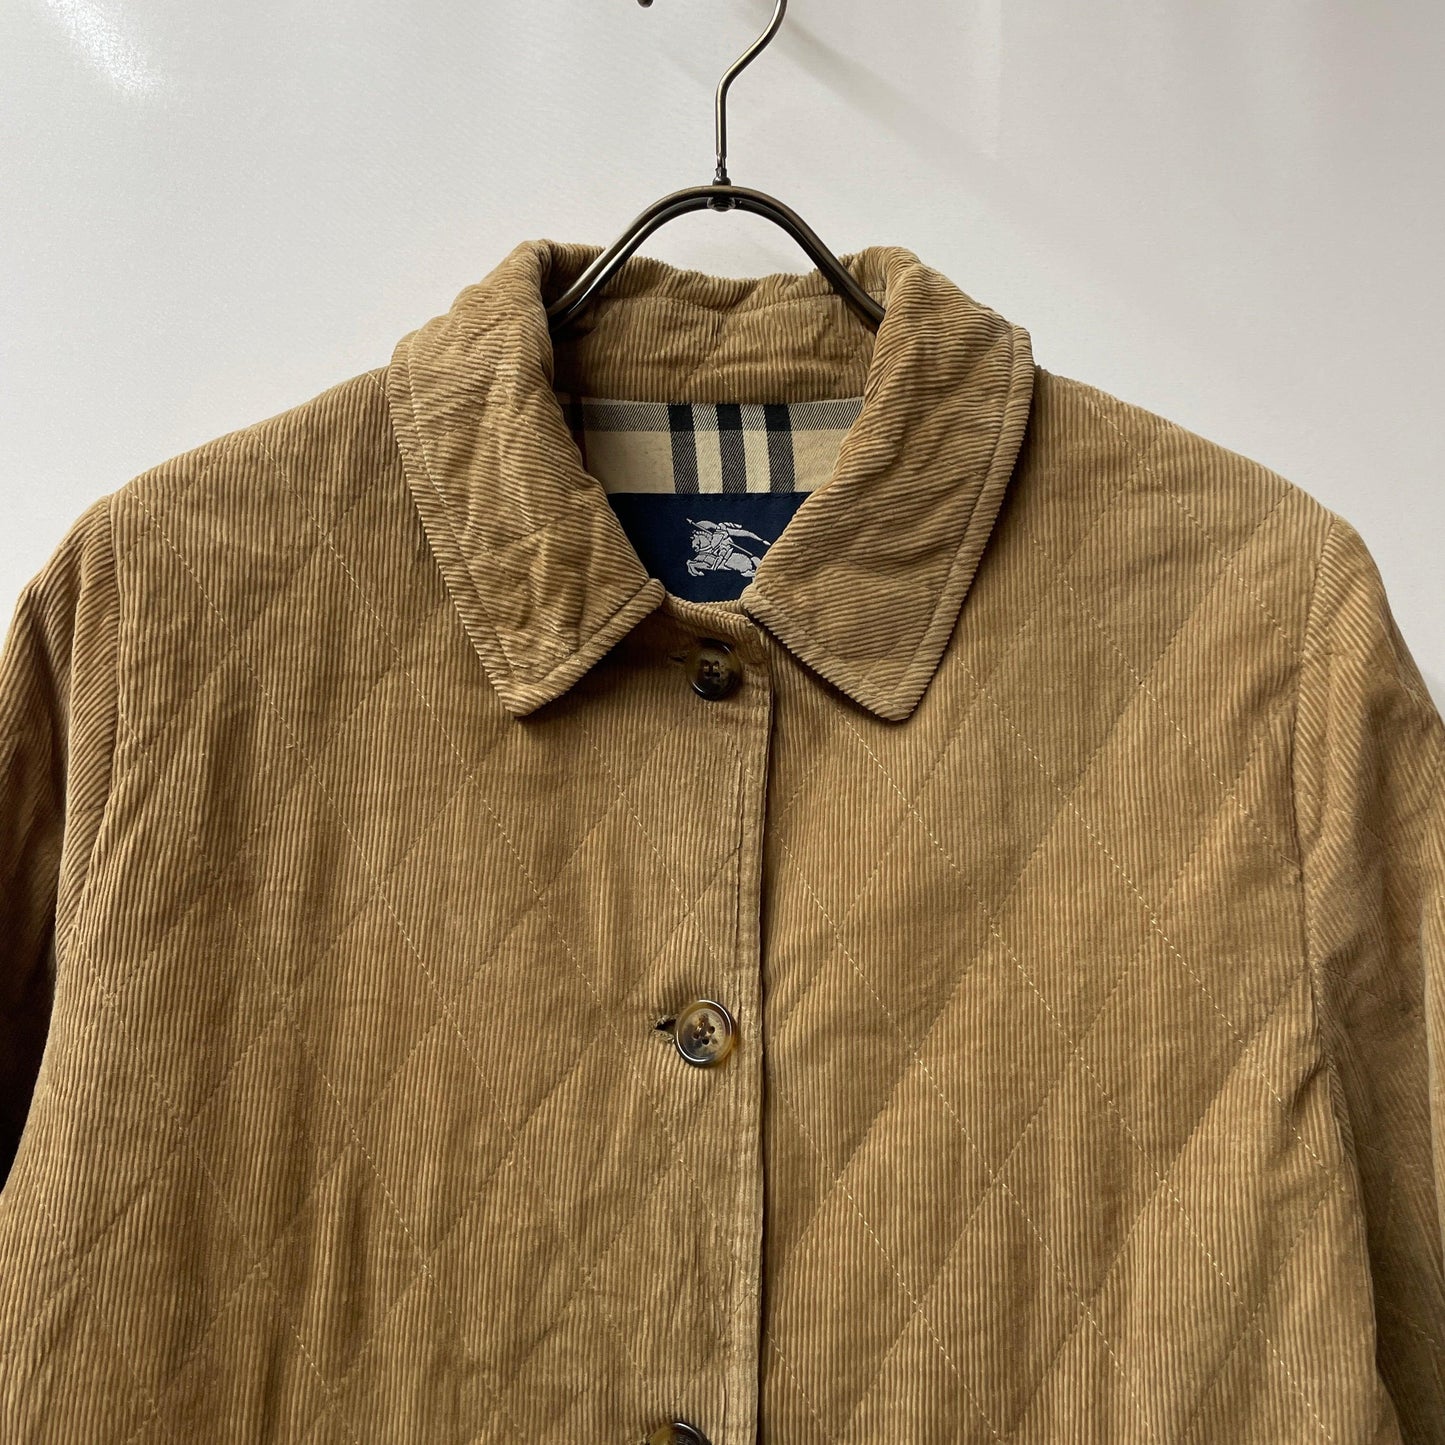 burberry london jacket corduroy quilted jacket